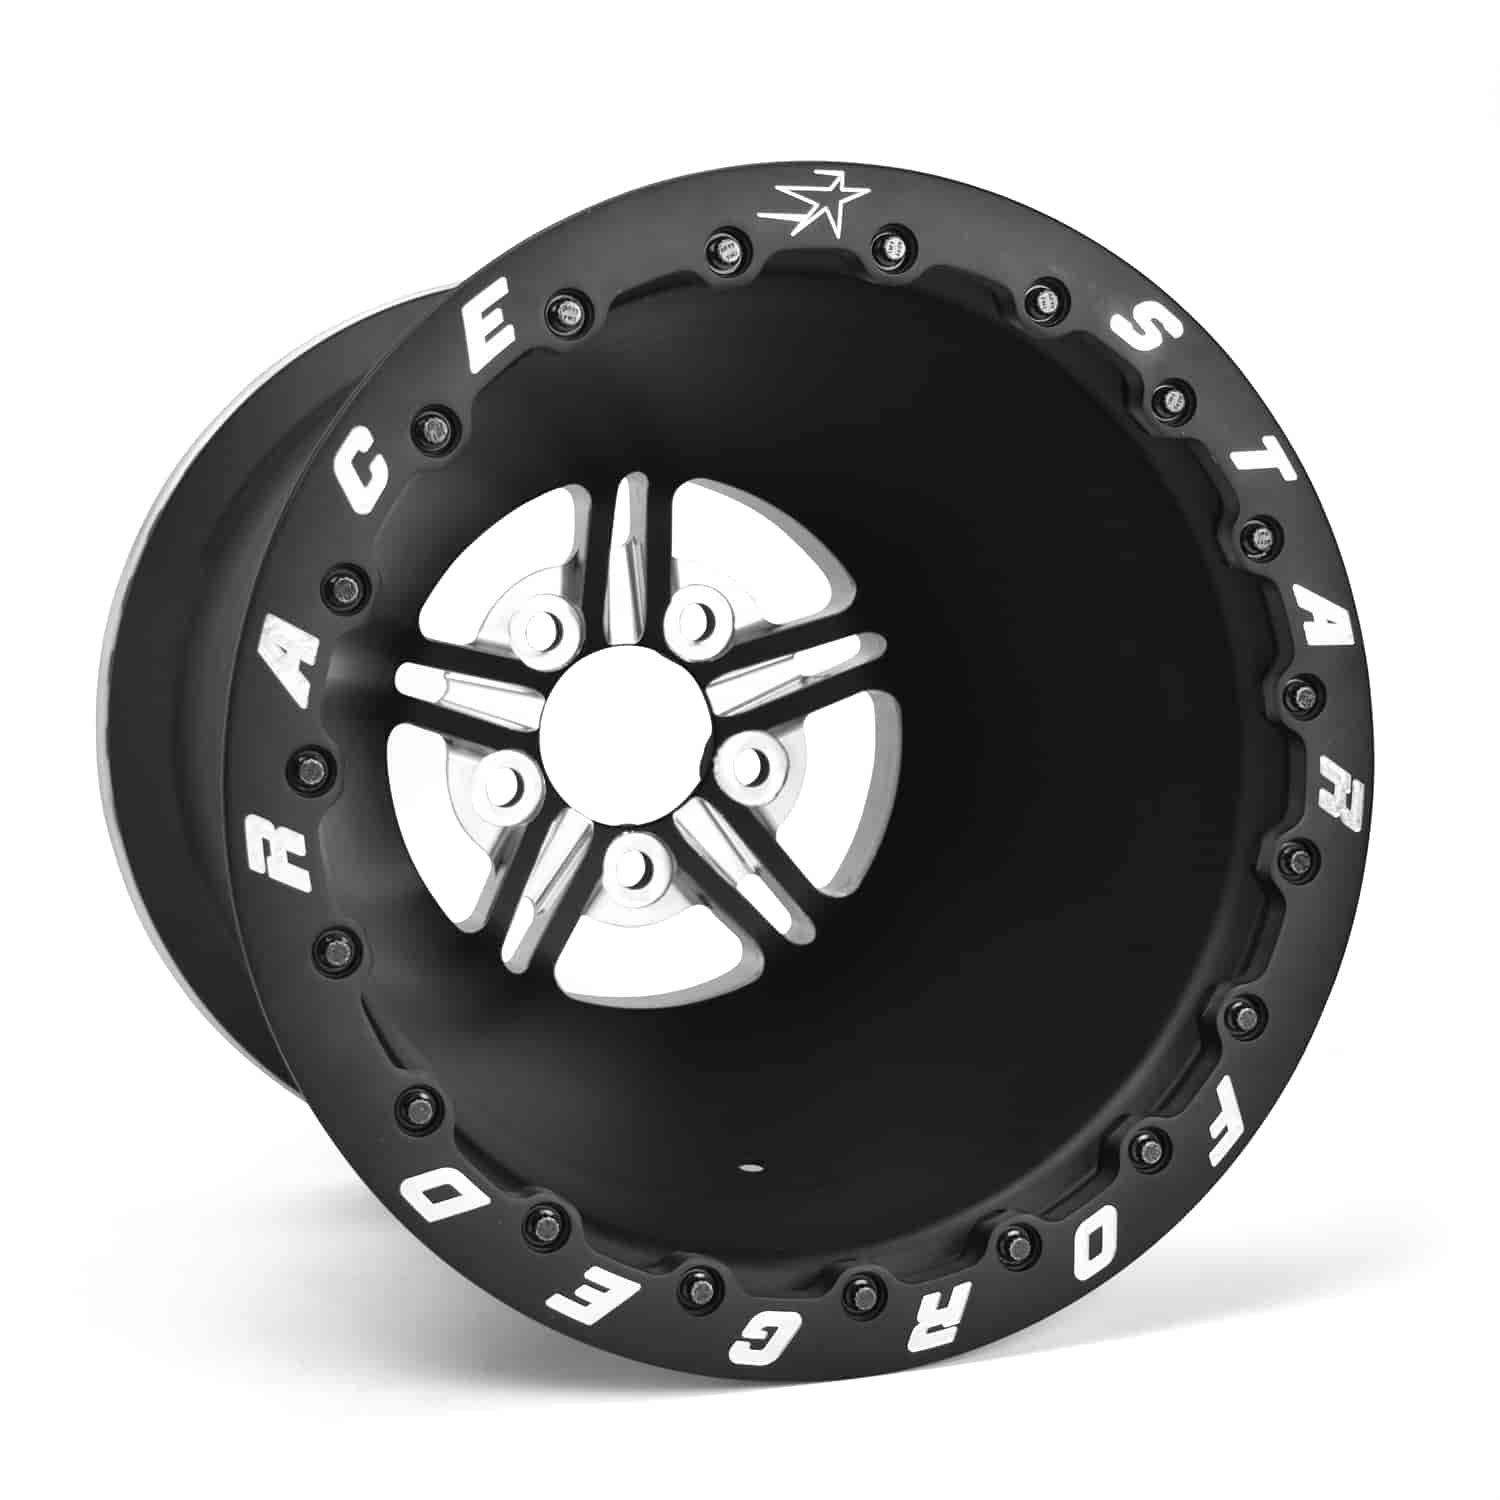 63-Series Pro Forged Double Bead-Lock Wheel Size: 15" x 10"